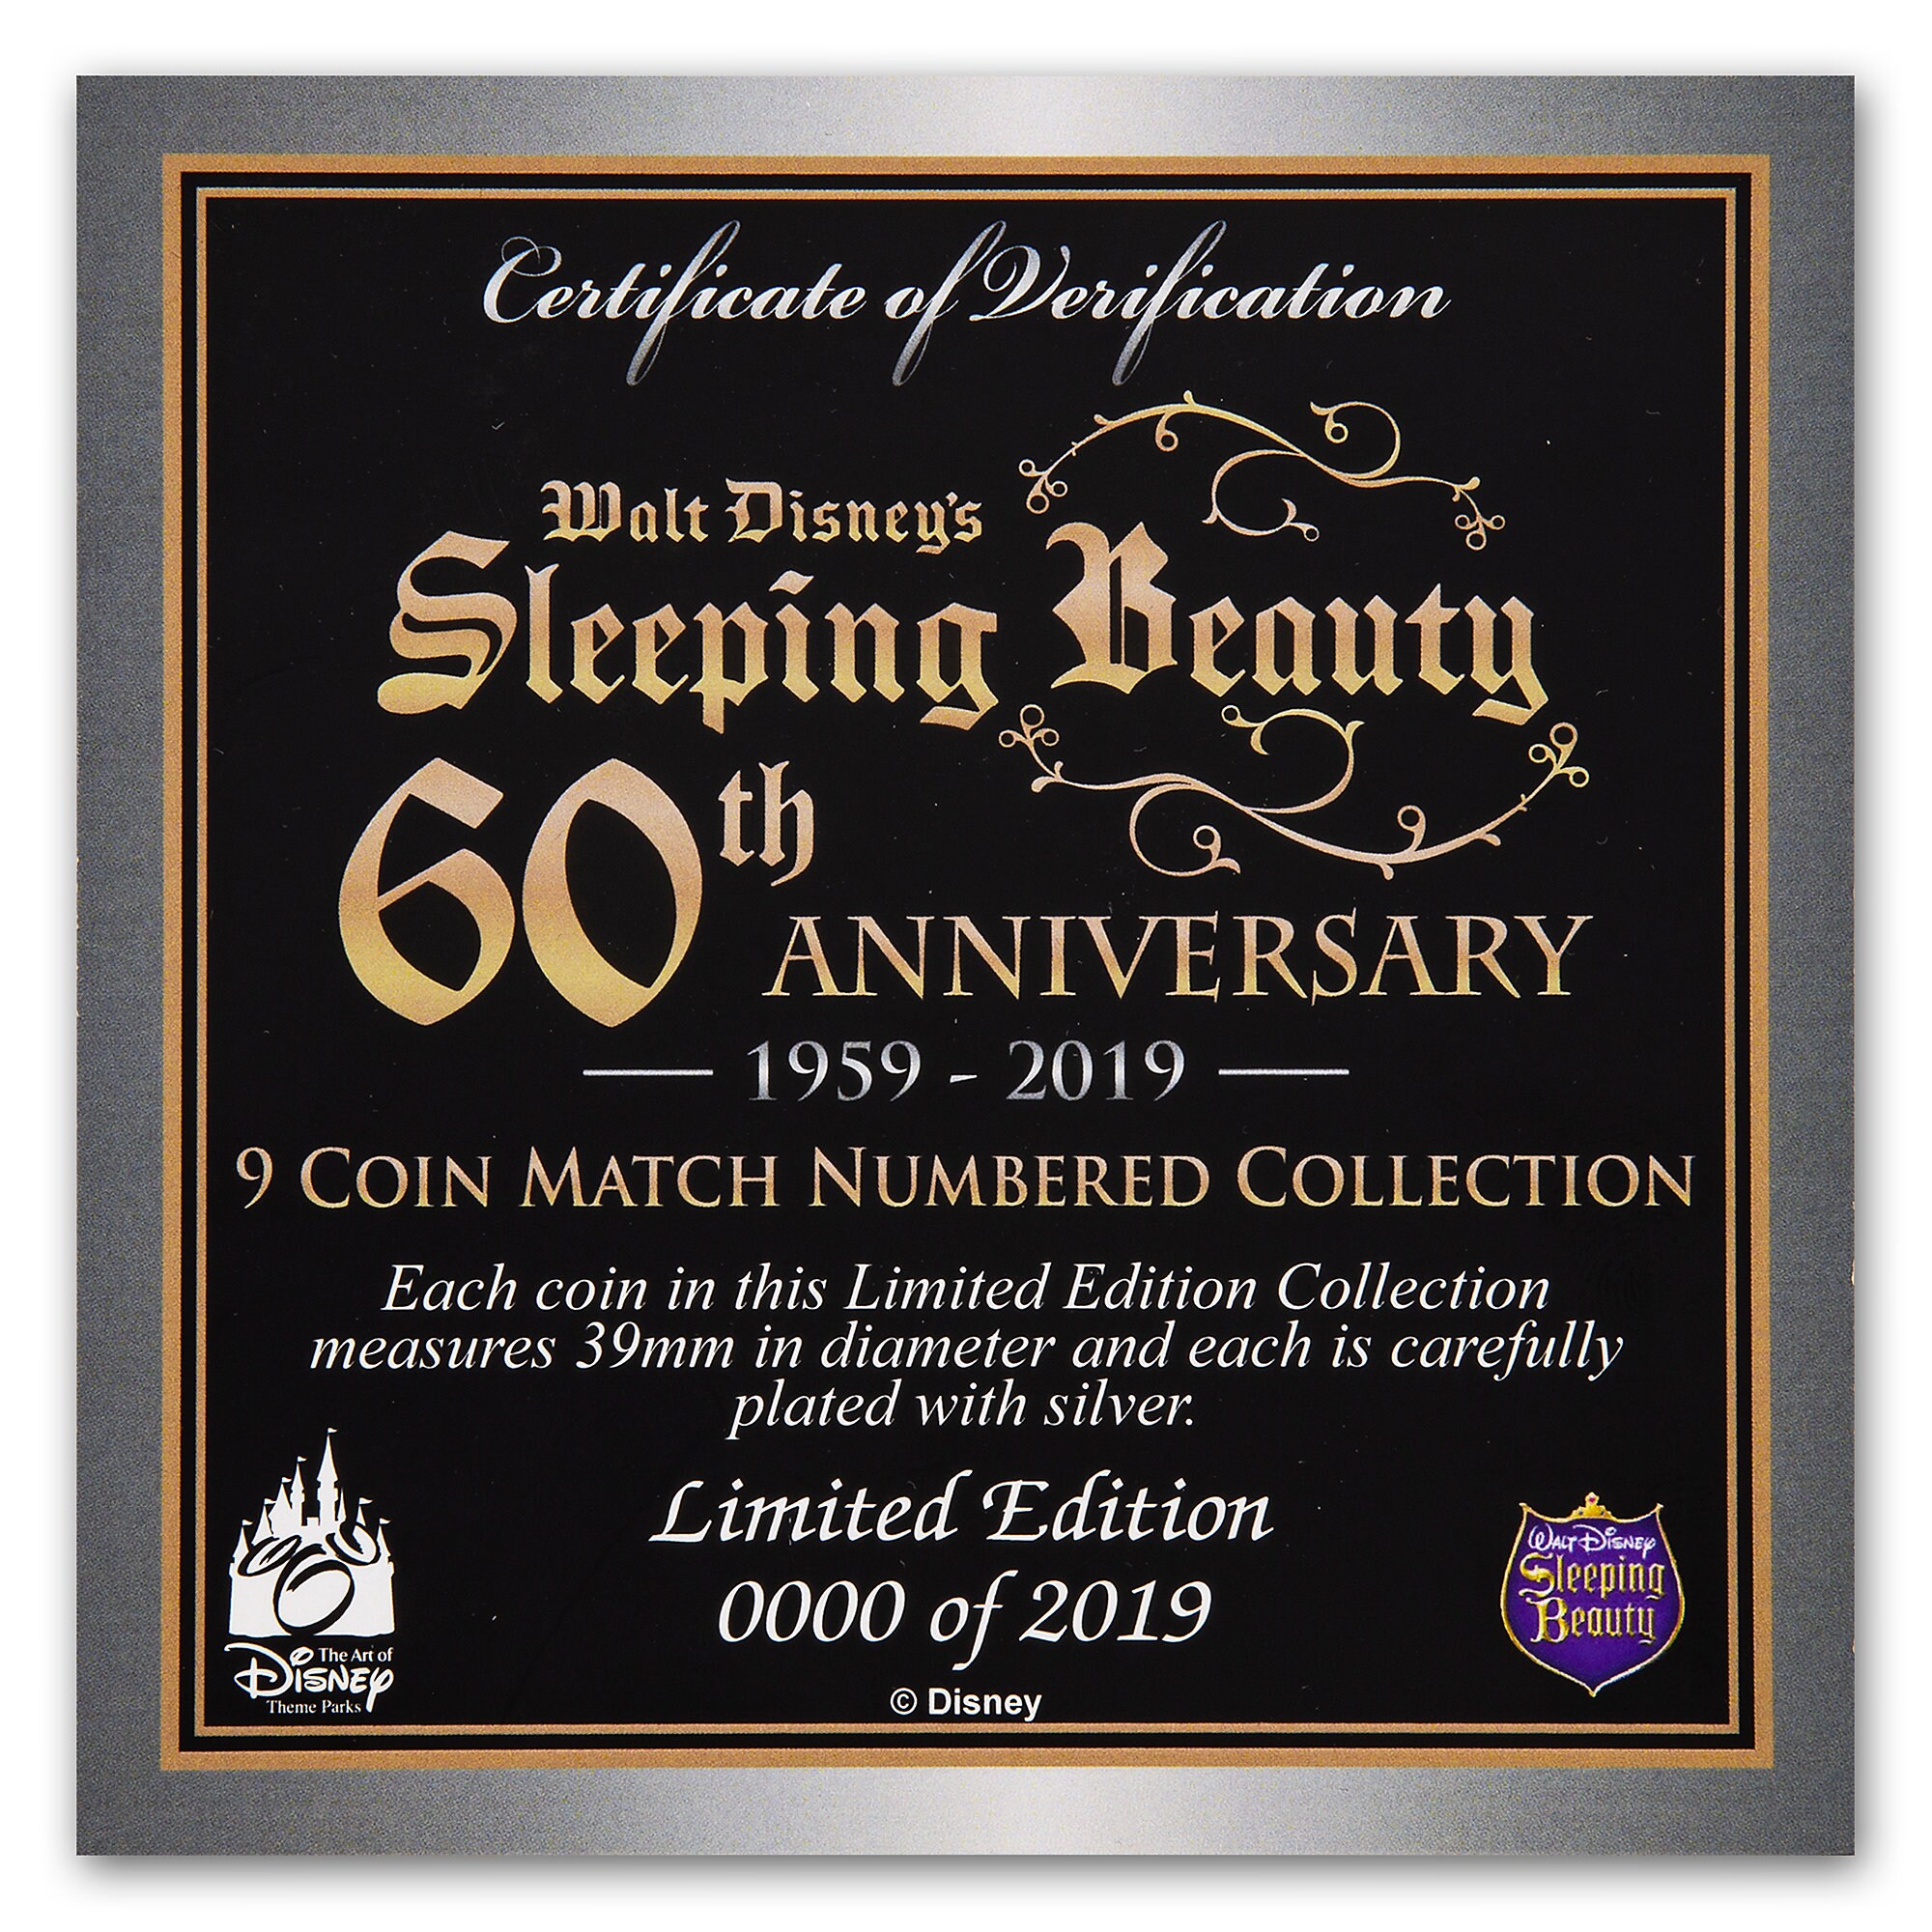 Sleeping Beauty Coin Set - 60th Anniversary - Limited Edition